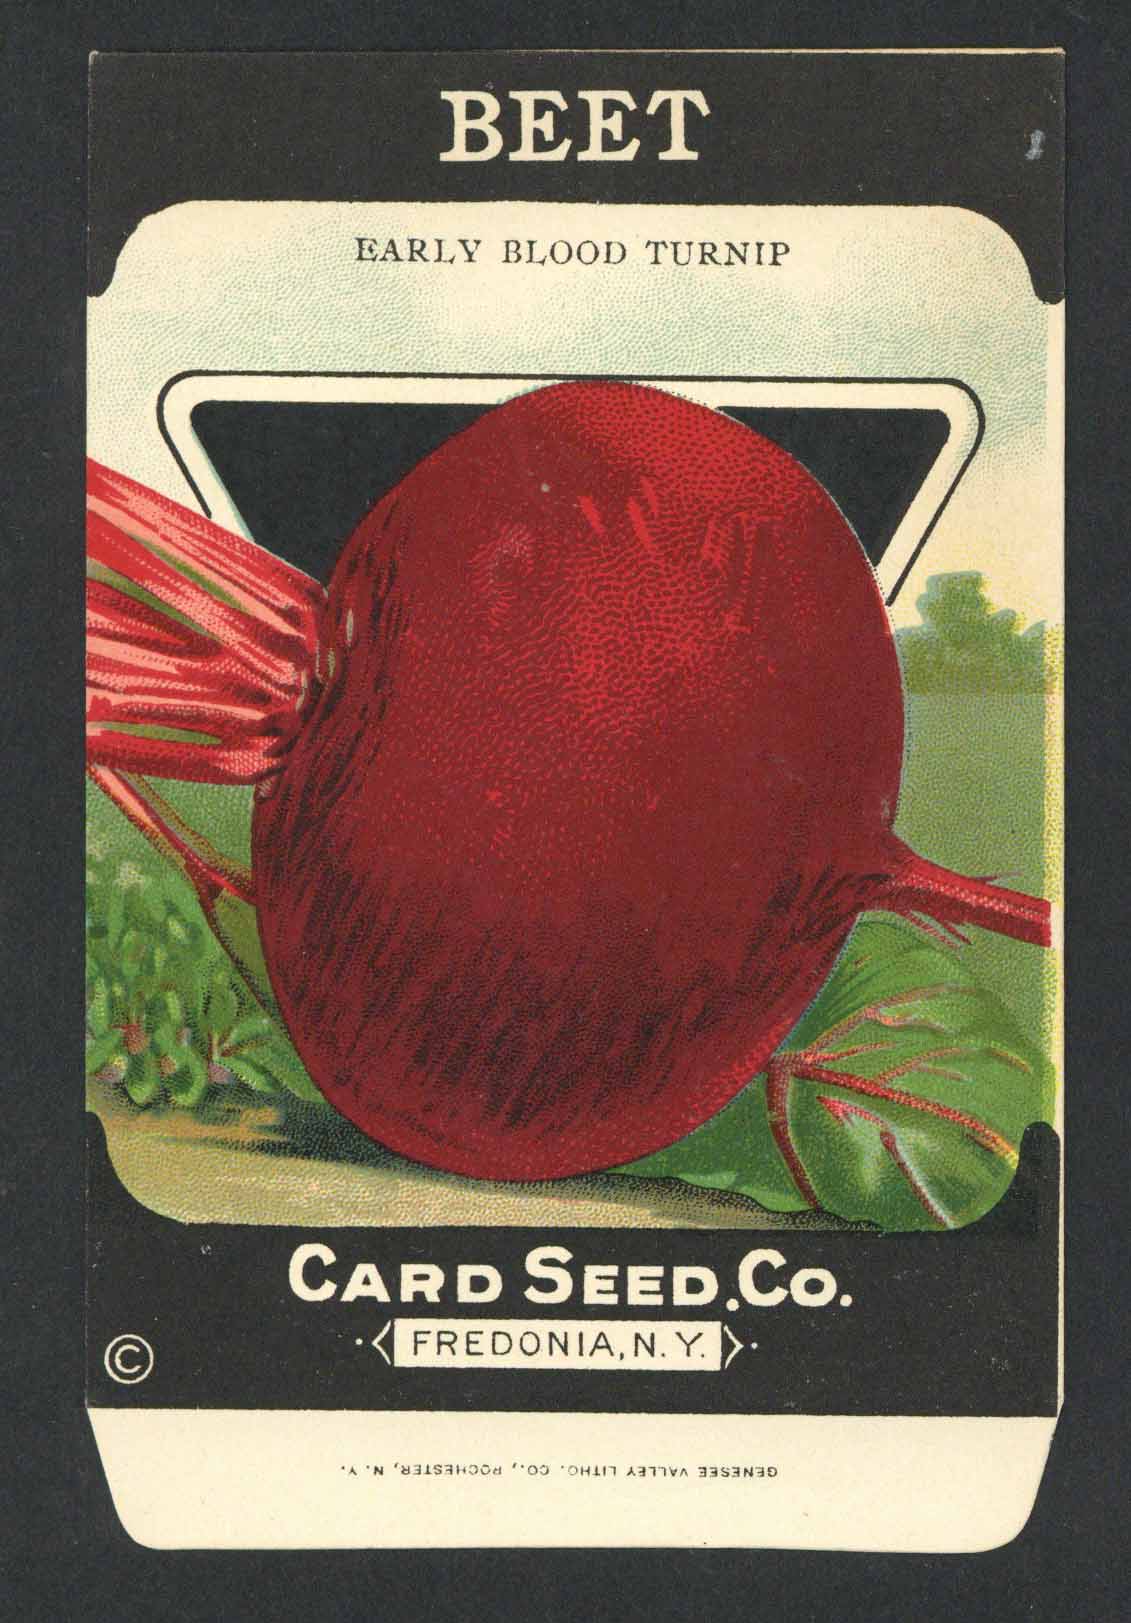 Beet Antique Card Seed Co. Seed Packet, Early Blood Turnip